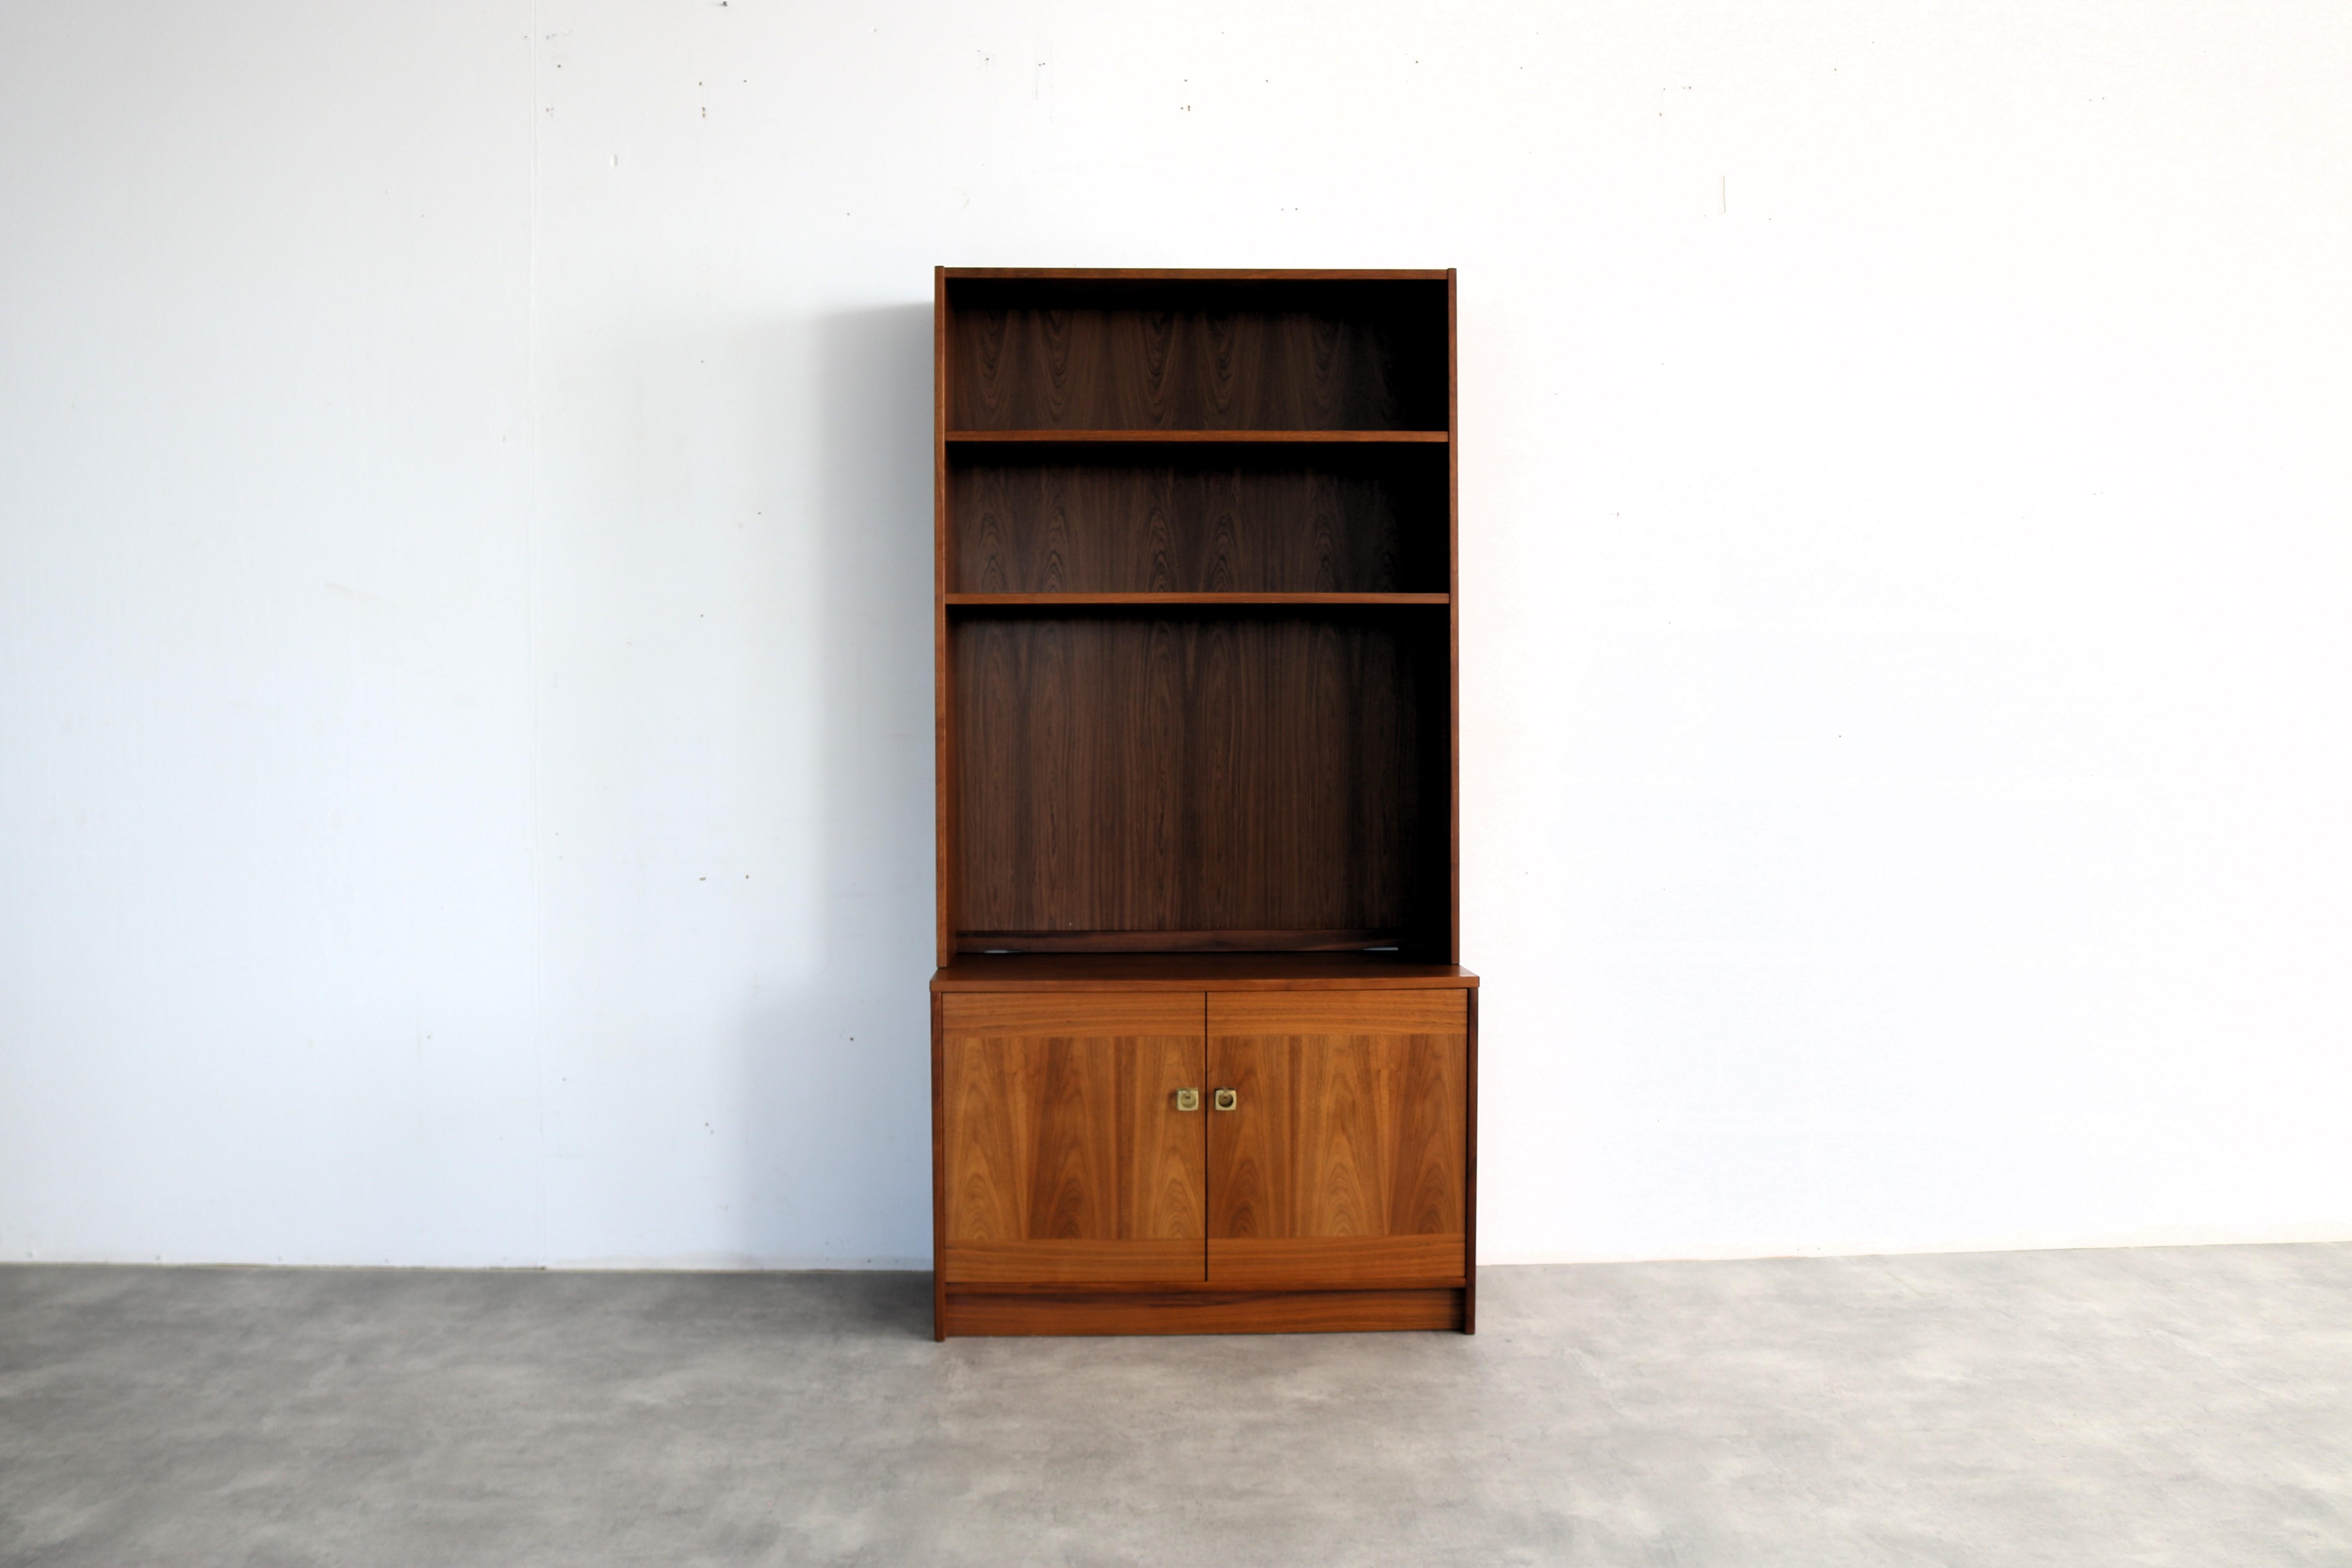 vintage wall cupboard | wall unit | 60s | Sweden

period | 60's
design | unknown | Sweden
condition | good | light signs of use
size | 180 x 90 x 43 (hxwxd)

details | teak; brass; can be combined with matching cabinets;

article number | 2180